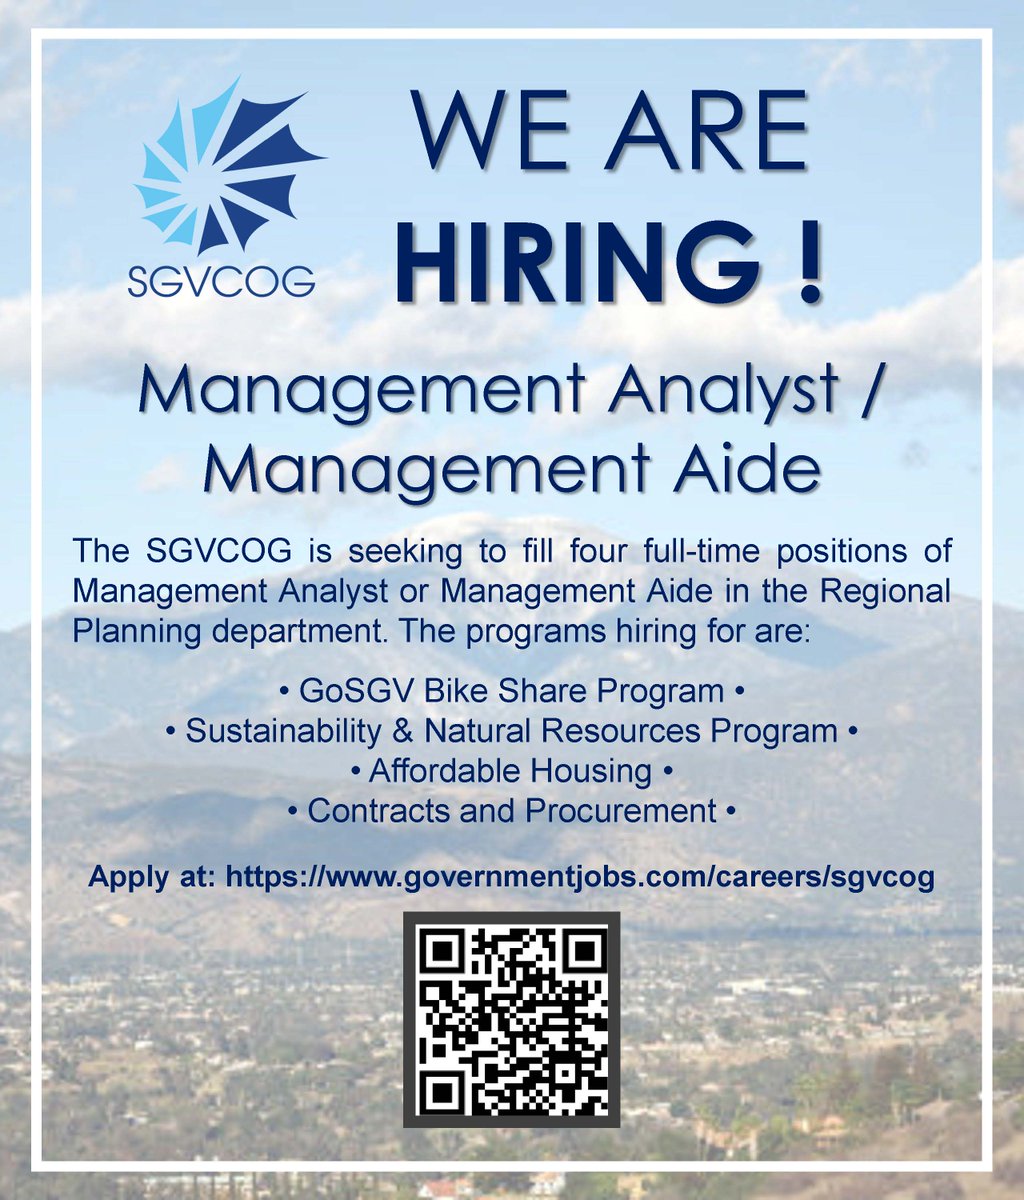 We are #hiring! The SGVCOG is filling four FTEs of Management Analysts or Management Aides in our Regional Planning department. Apply now at: lnkd.in/ecRMee5 #nowhiring #joinourteam #applytoday #SGVCOG